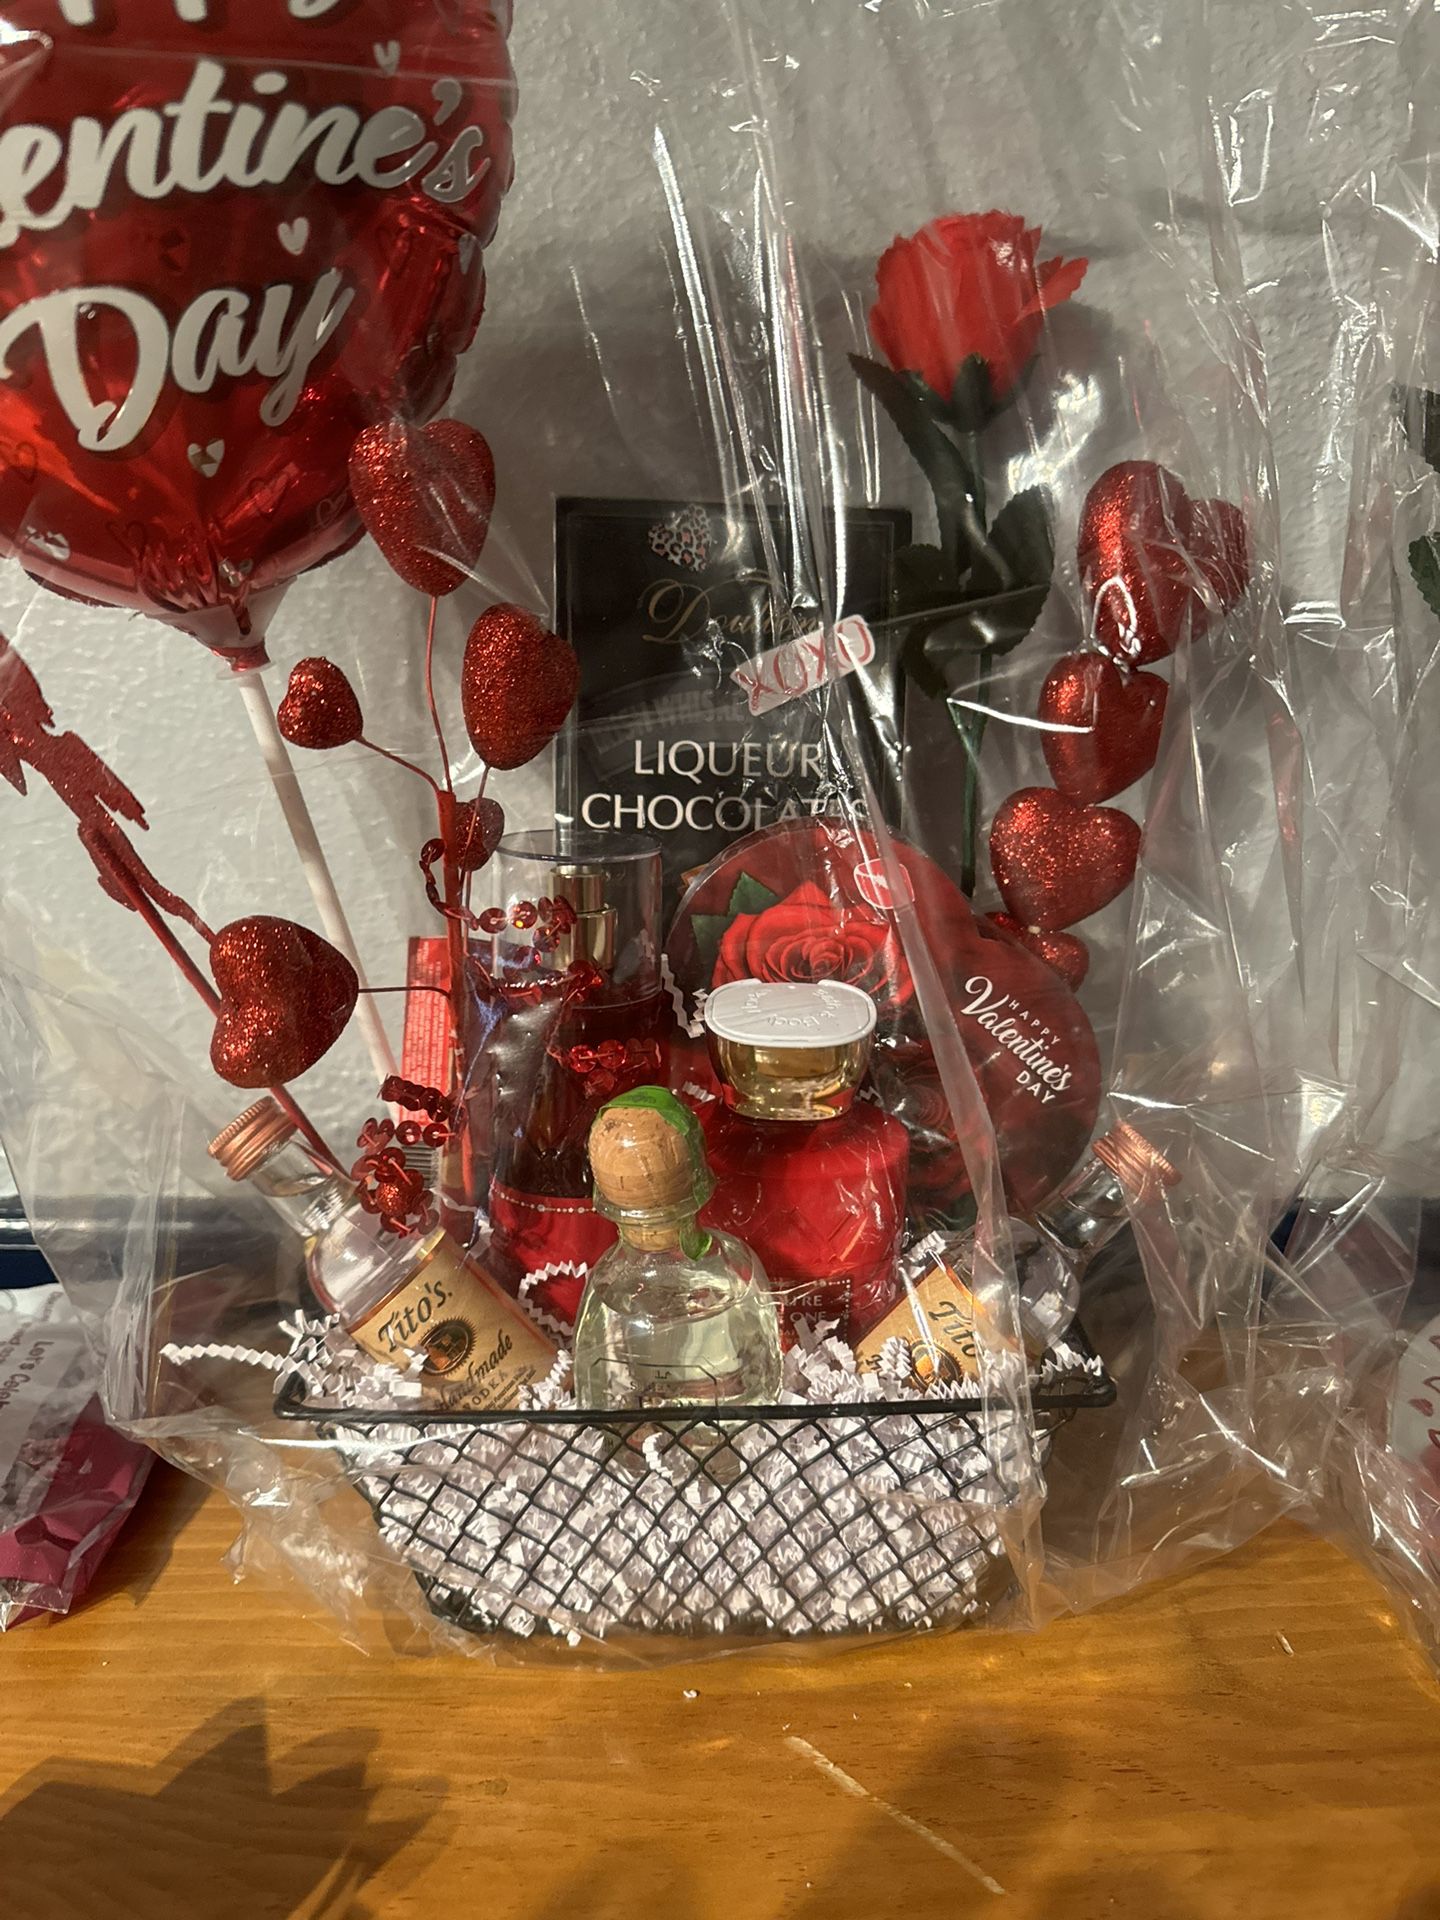 Valentine’s Gift Bags